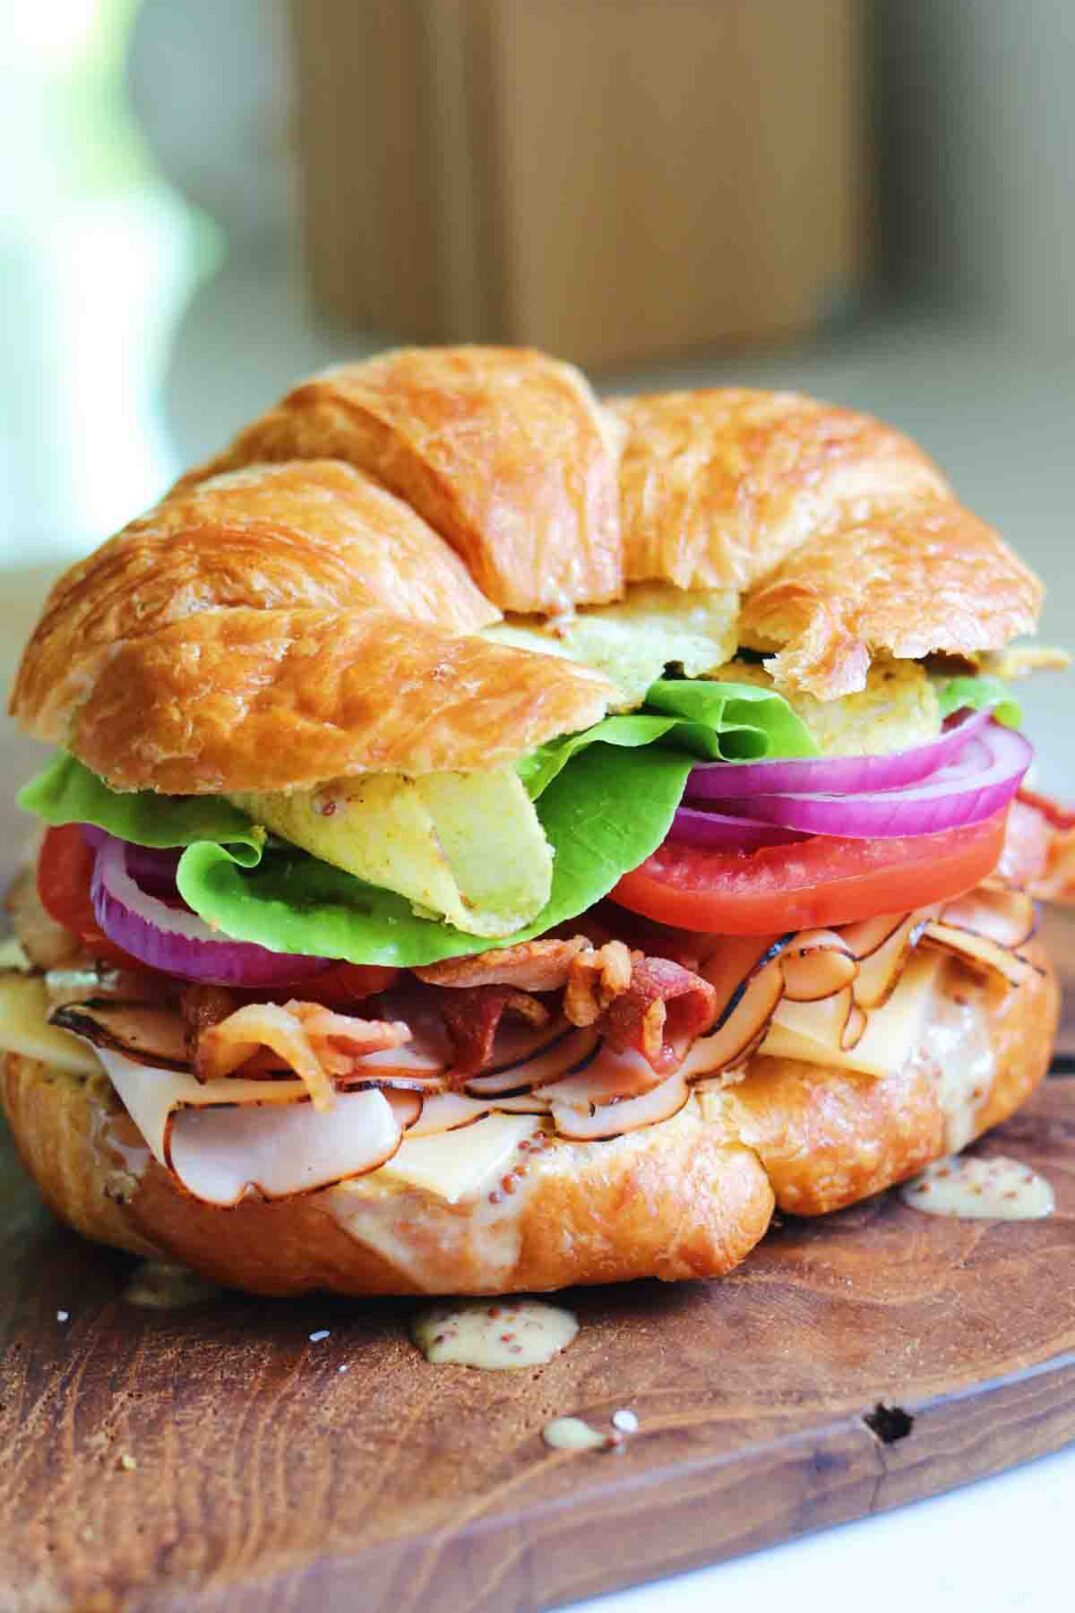 a side view of a perfectly colorful turkey sandwich built on a croissant with honey mustard and veggies.